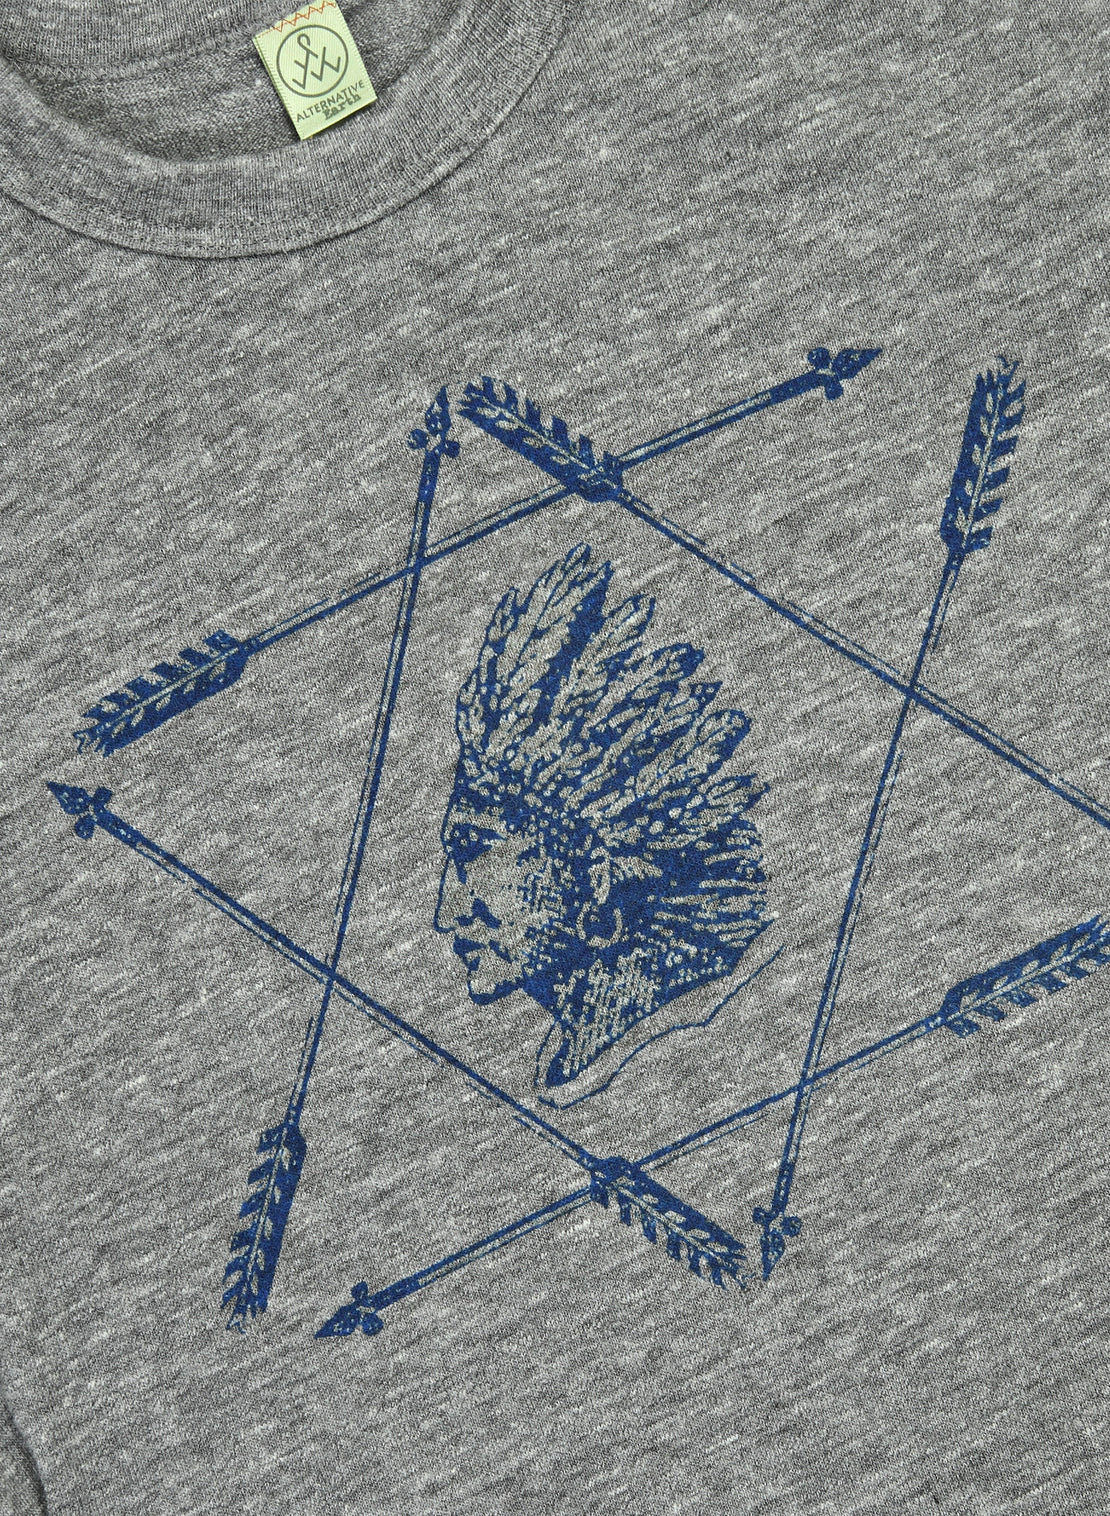 Graphic Tee - Arrows - Alchemy Design - STAG Provisions - Tops - S/S Tee - Graphic